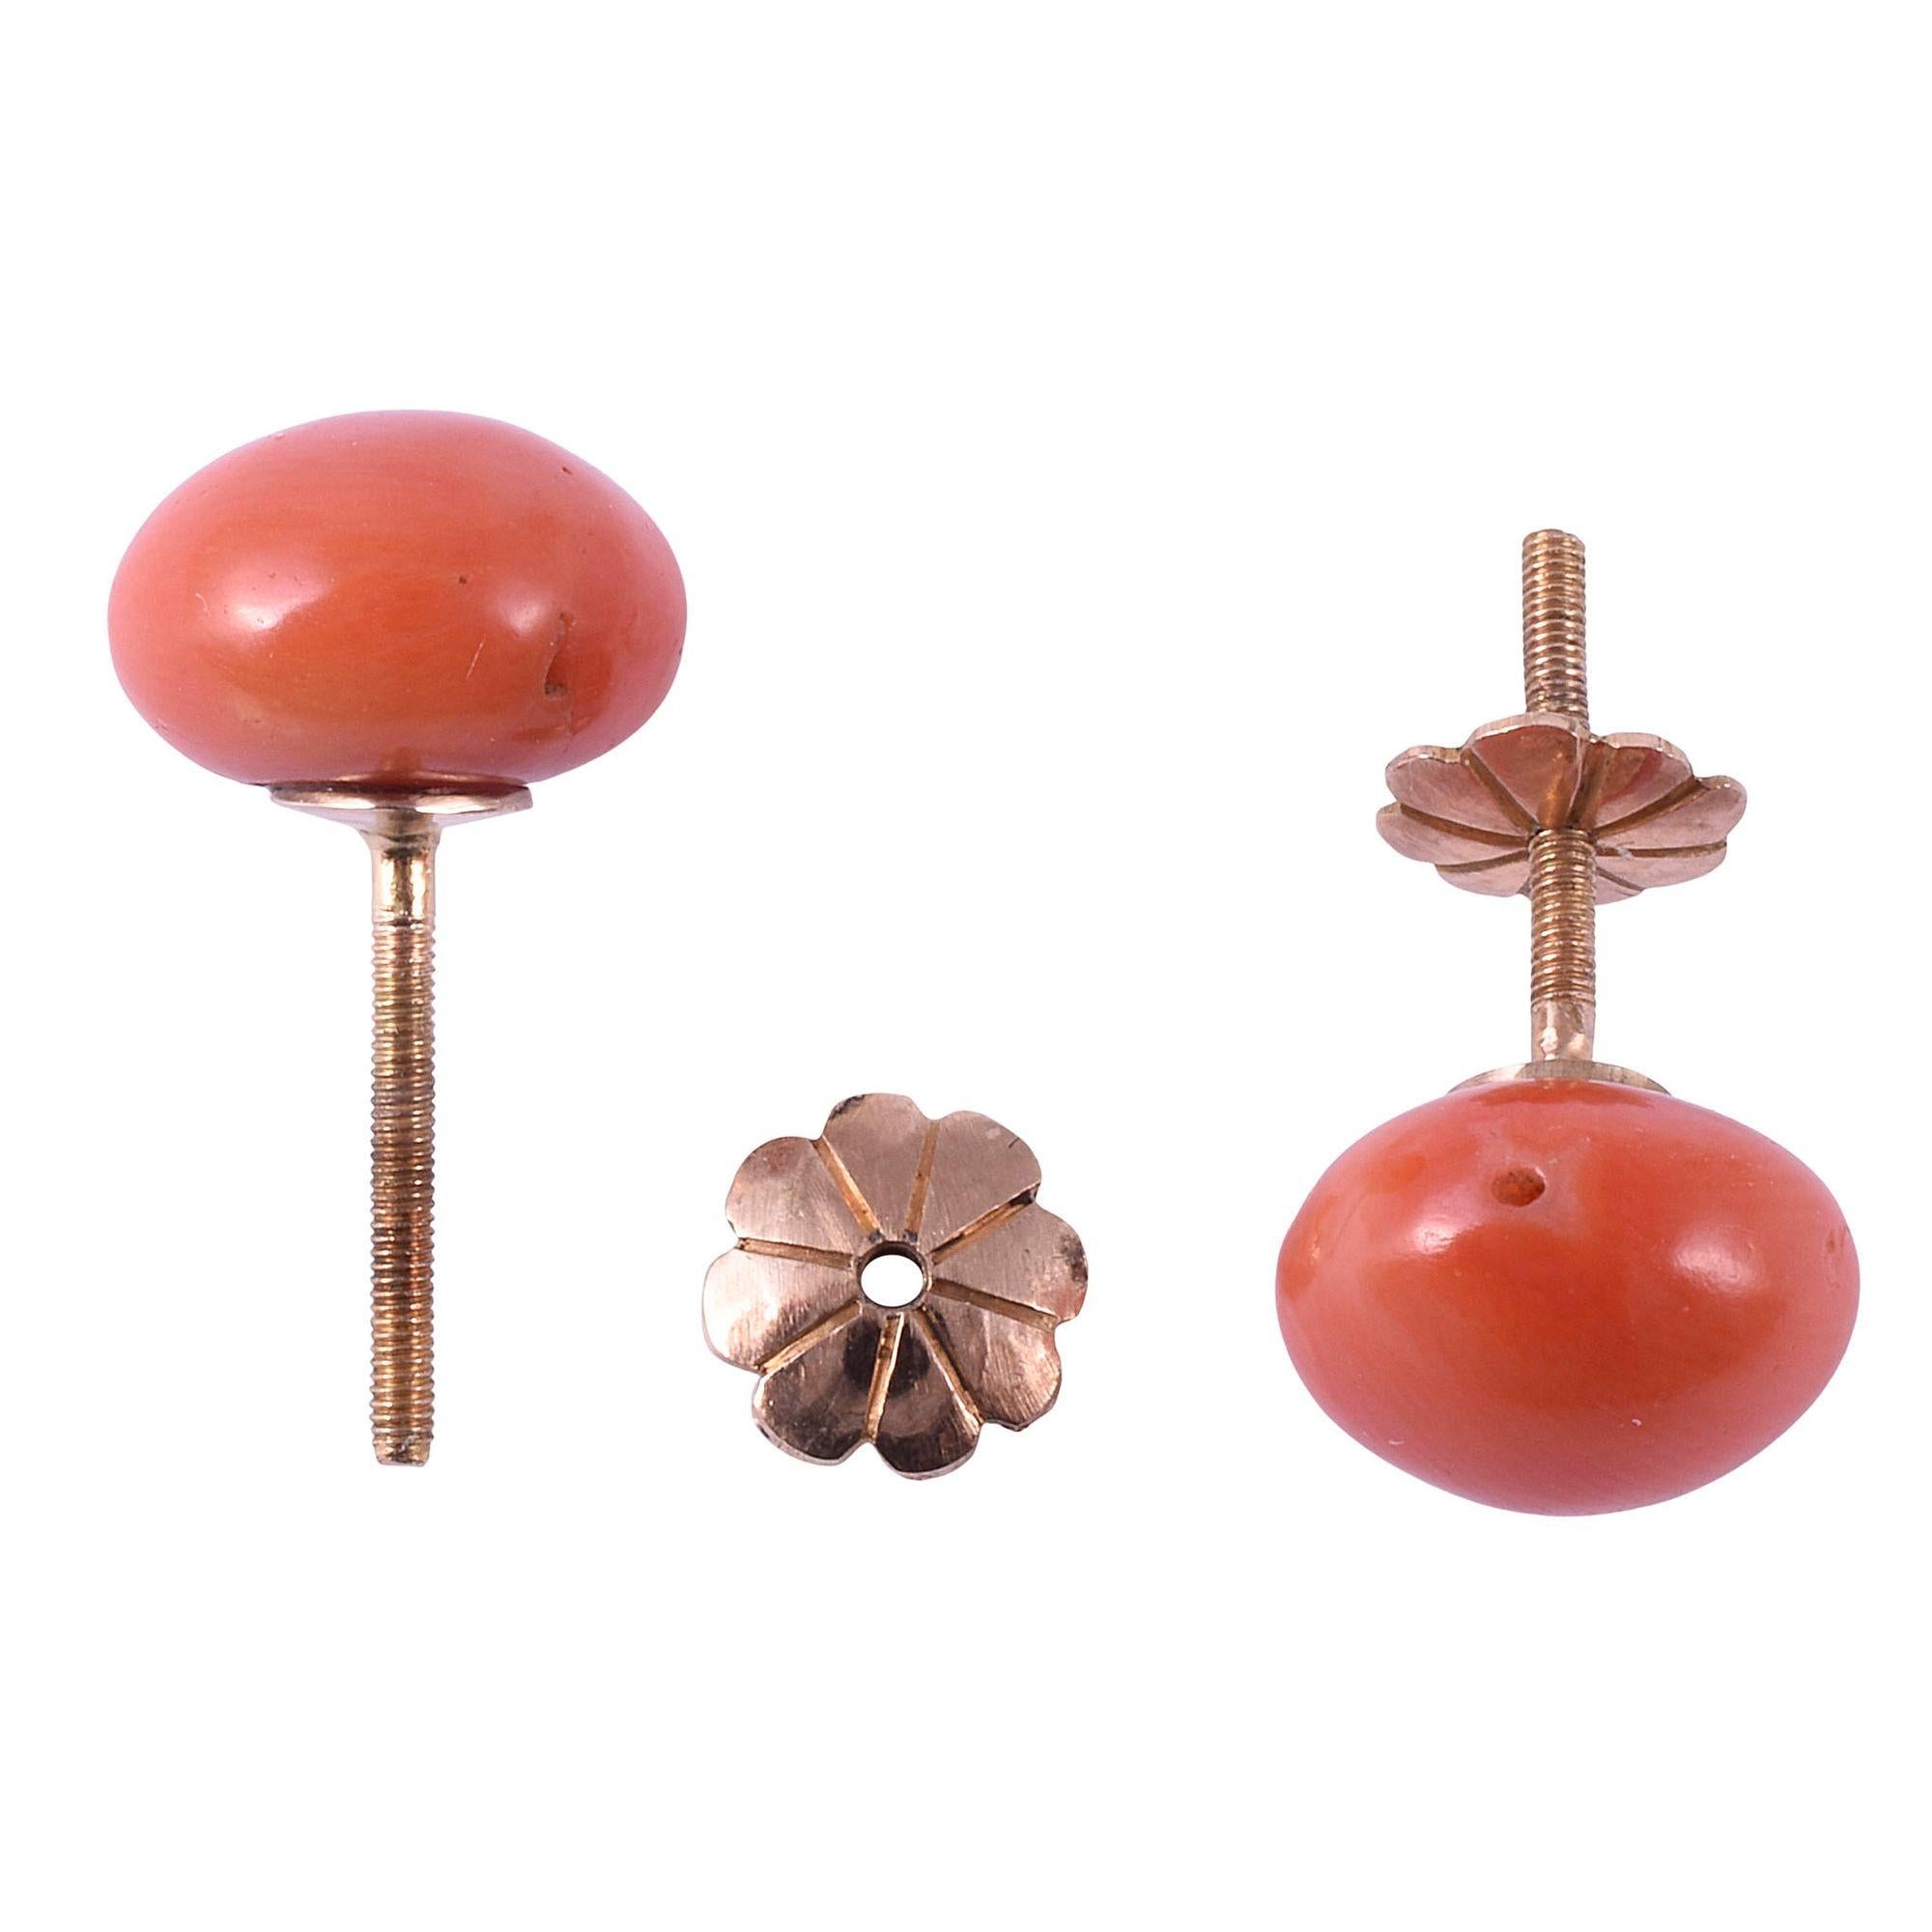 Vintage salmon coral stud earrings. These earrings feature button shaped salmon color coral measuring 10mm x 10mm x 6.5mm. The vintage coral earrings have 18 karat gold screw posts and backs. [KIMH 593]